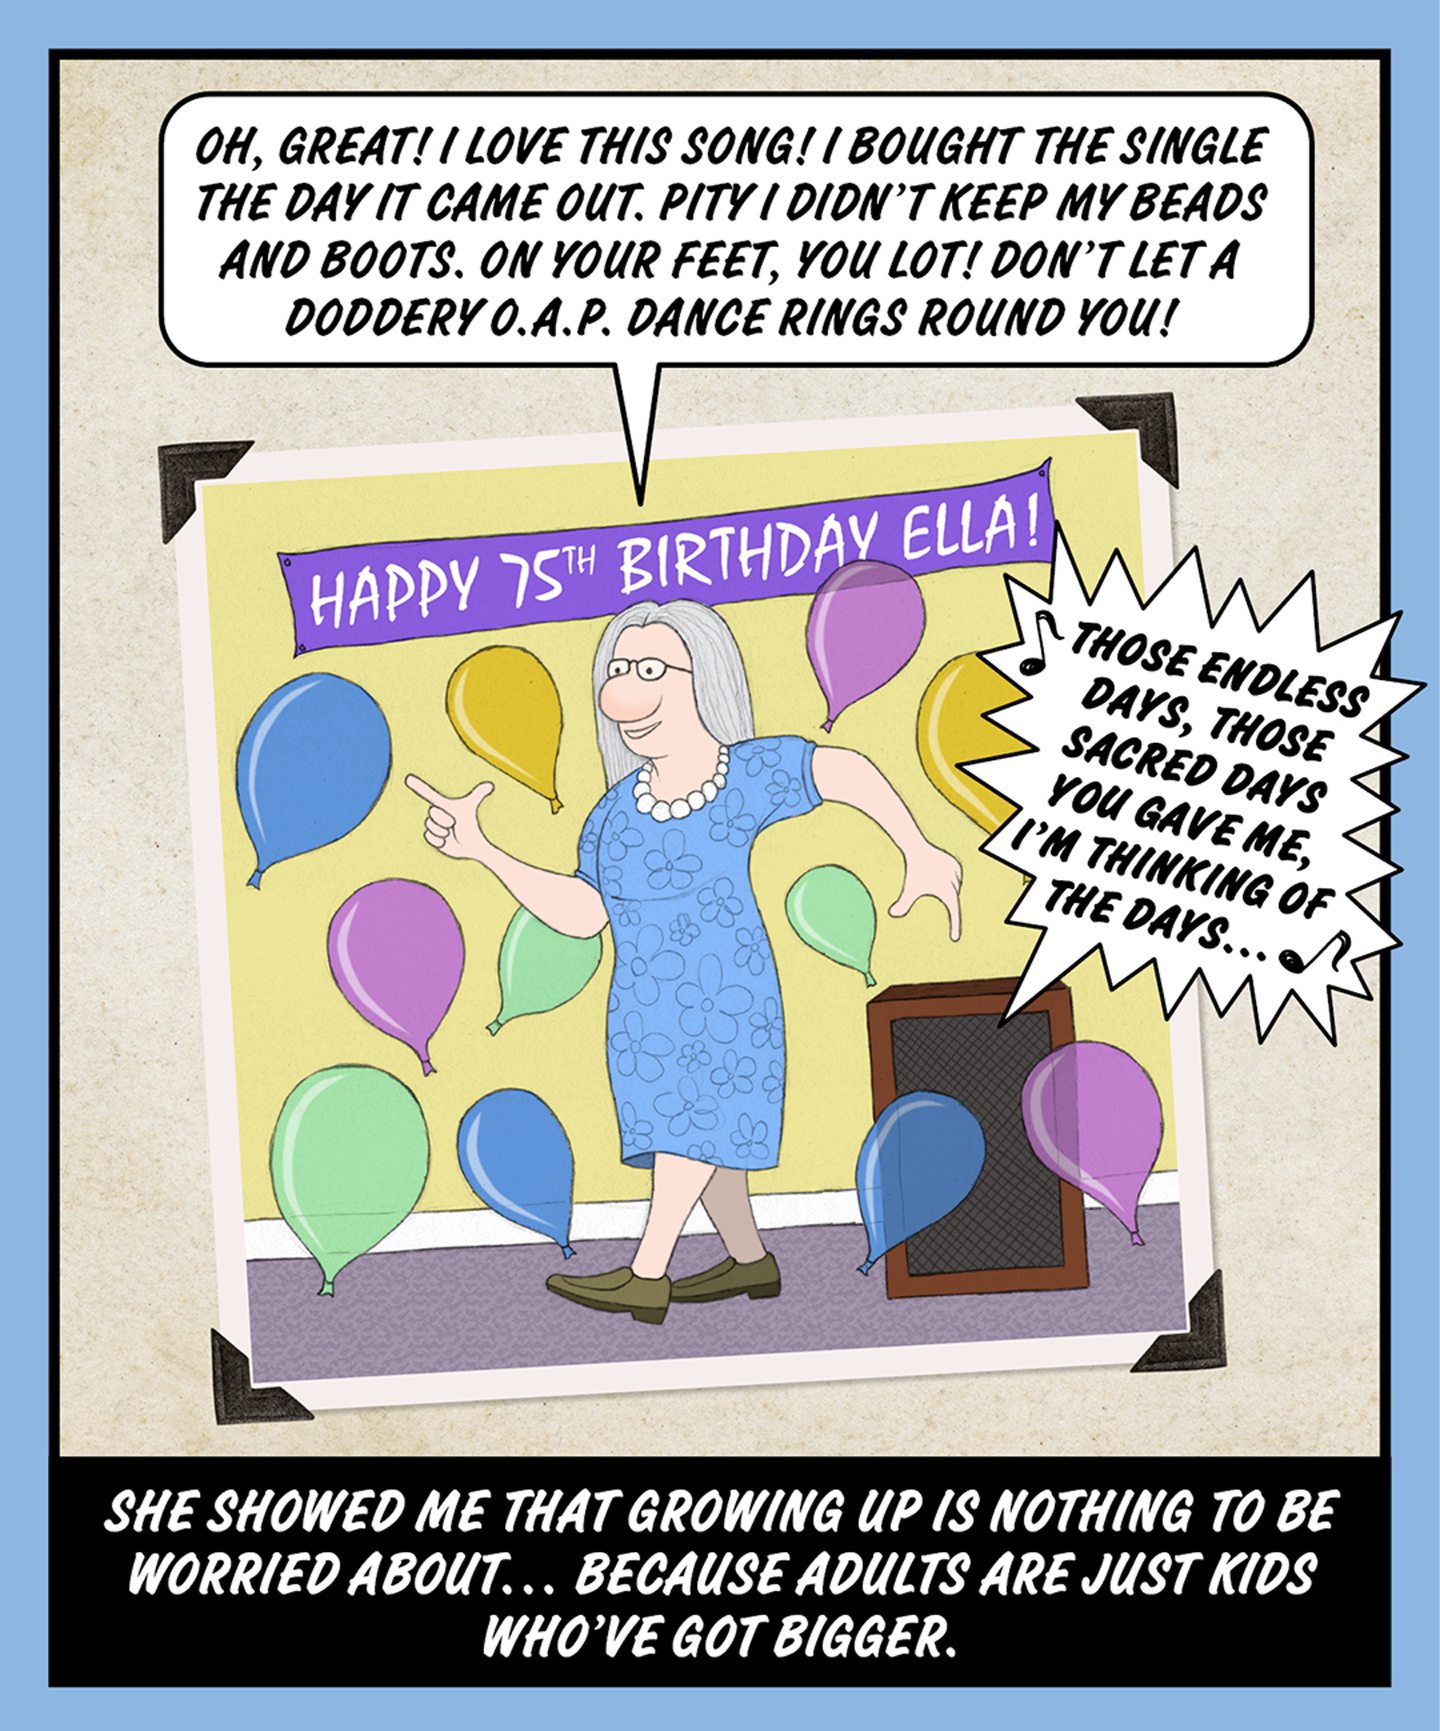 A comic illustration of a granny dancing with balloons falling around her and a happy 75th birthday Ella banner above her. The text in the speech bubble from the granny reads: OH, GREAT! I LOVE THIS SONG! I BOUGHT THE SINGLE THE DAY IT CAME OUT. PITY I DIDN'T KEEP MY BEADS AND BOOTS. ON YOUR FEET, YOU LOT! DON'T LET A DODDERY O.A.P. DANCE RINGS ROUND YOU! The words below the image read: SHE SHOWED ME THAT GROWING UP IS NOTHING TO BE WORRIED ABOUT… BECAUSE ADULTS ARE JUST KIDS WHO'VE GOT BIGGER.